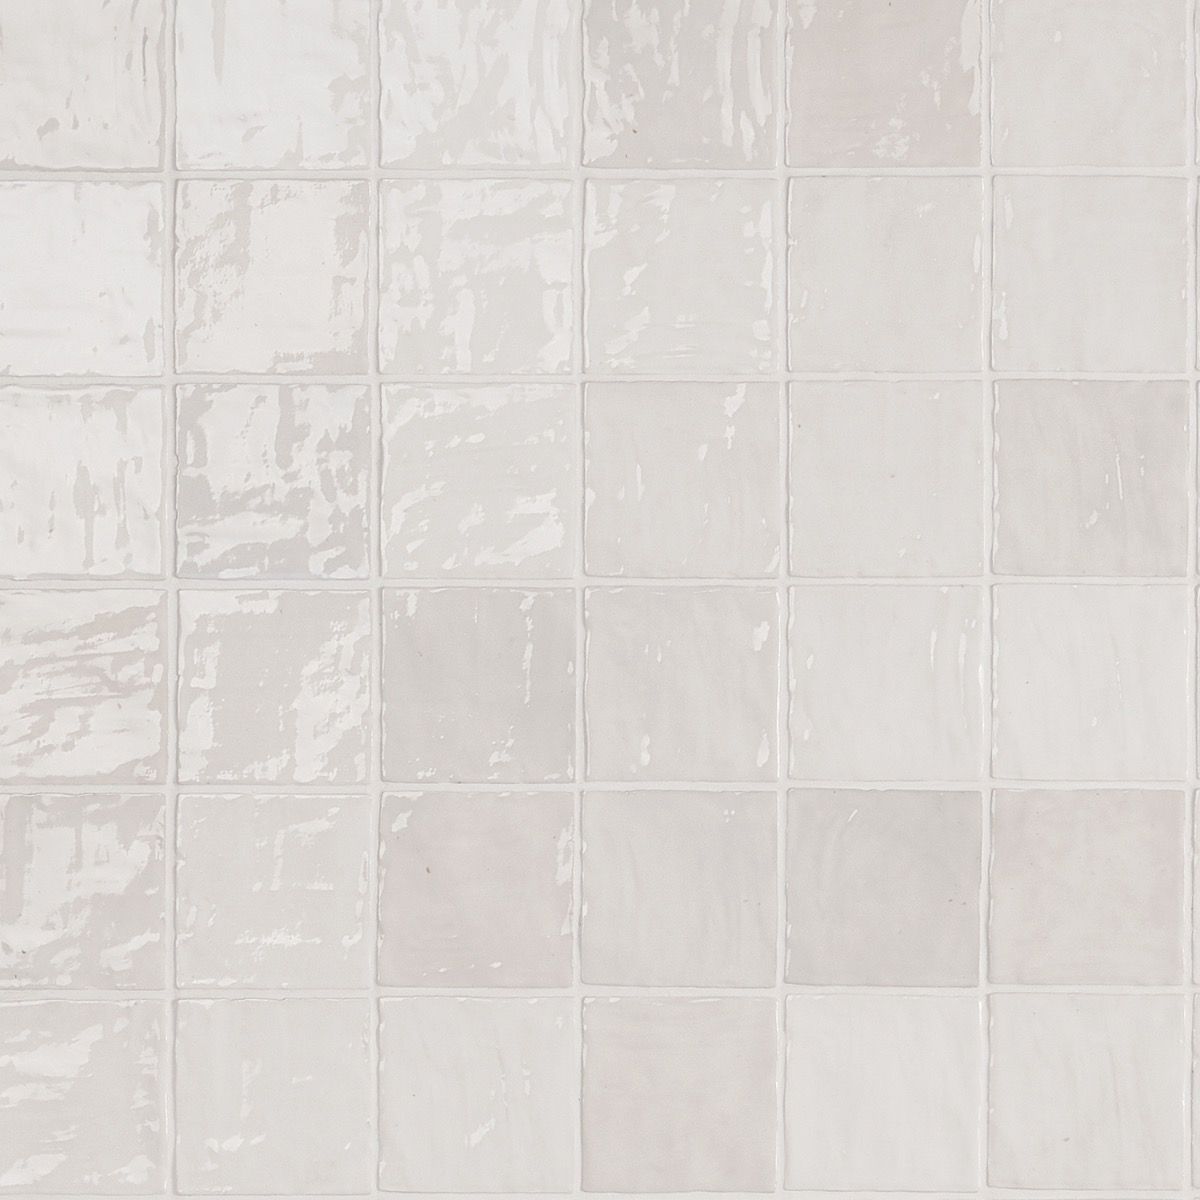 White subway tile with sqaures